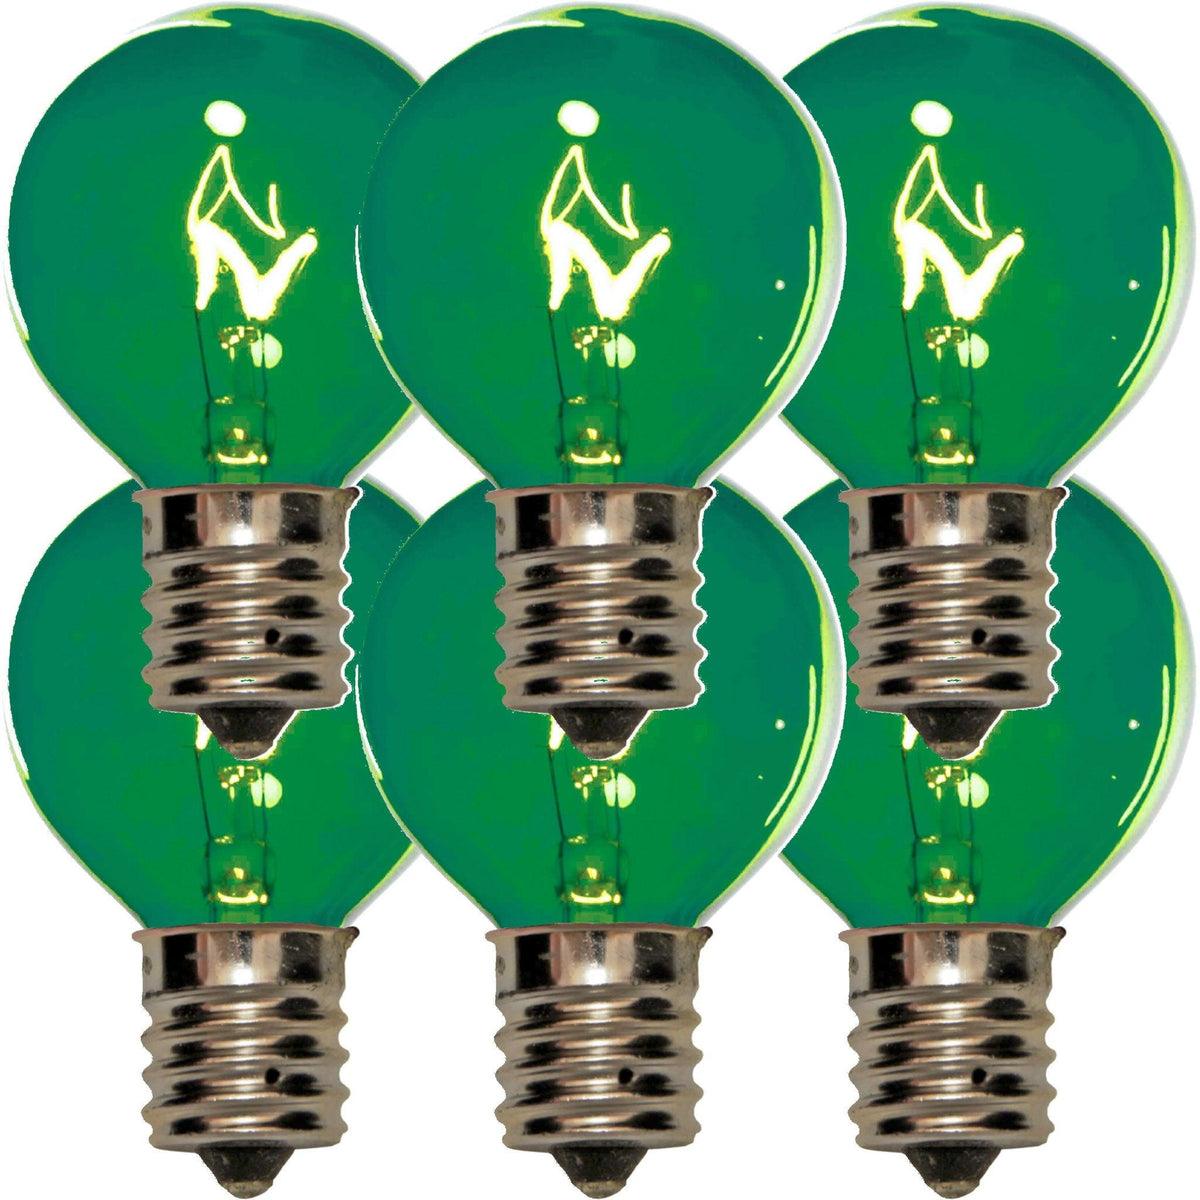 1 Box of 25 of brand new transparent Green G40 Globe Light Bulbs Replace your old bulbs today at leedisplay.com